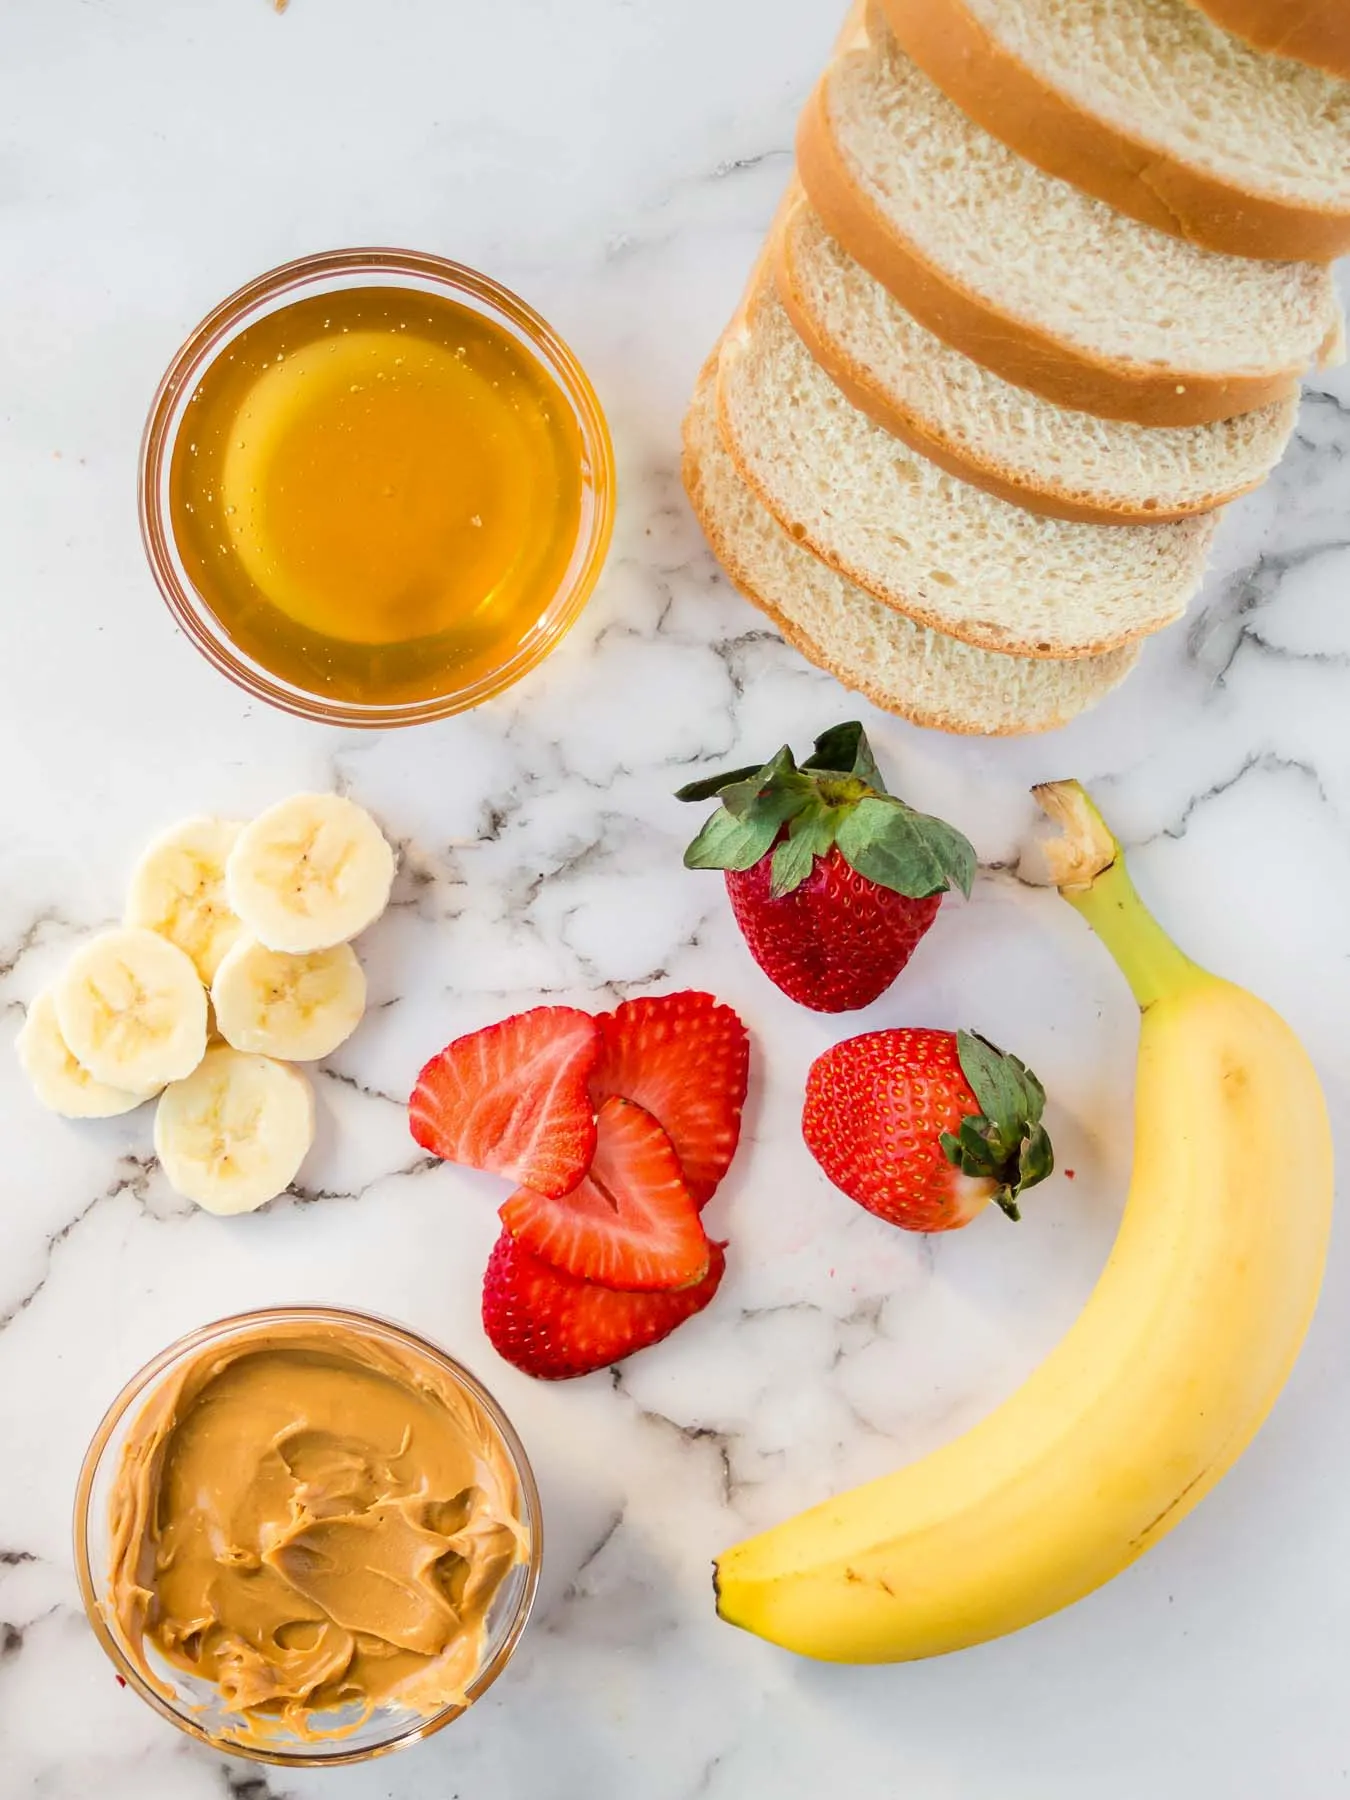 Ingredients to make grilled peanut butter honey banana sandwiches.